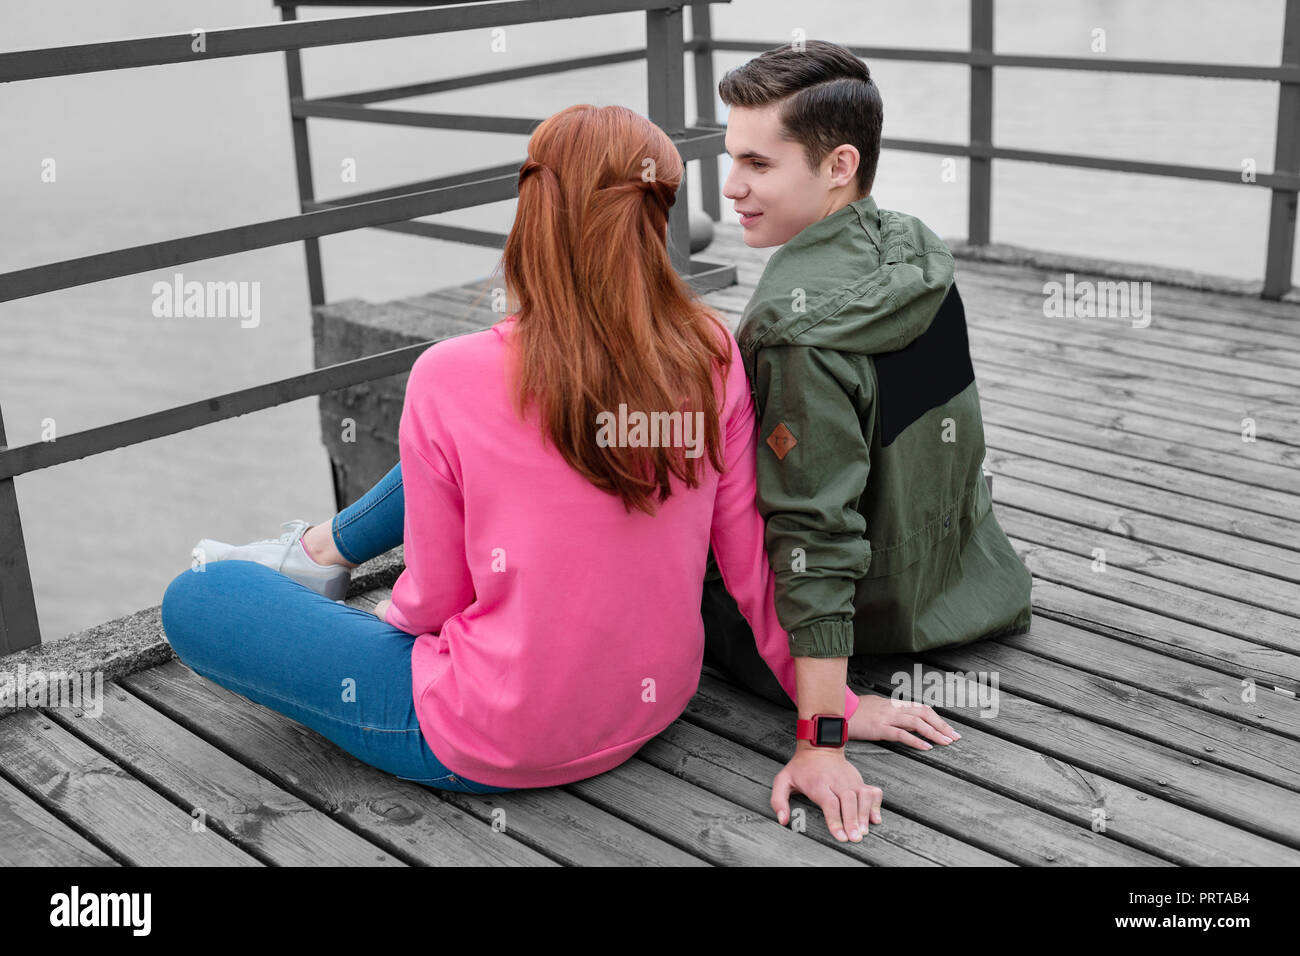 Emotional boy looking at his girlfriend while talking to her Stock Photo